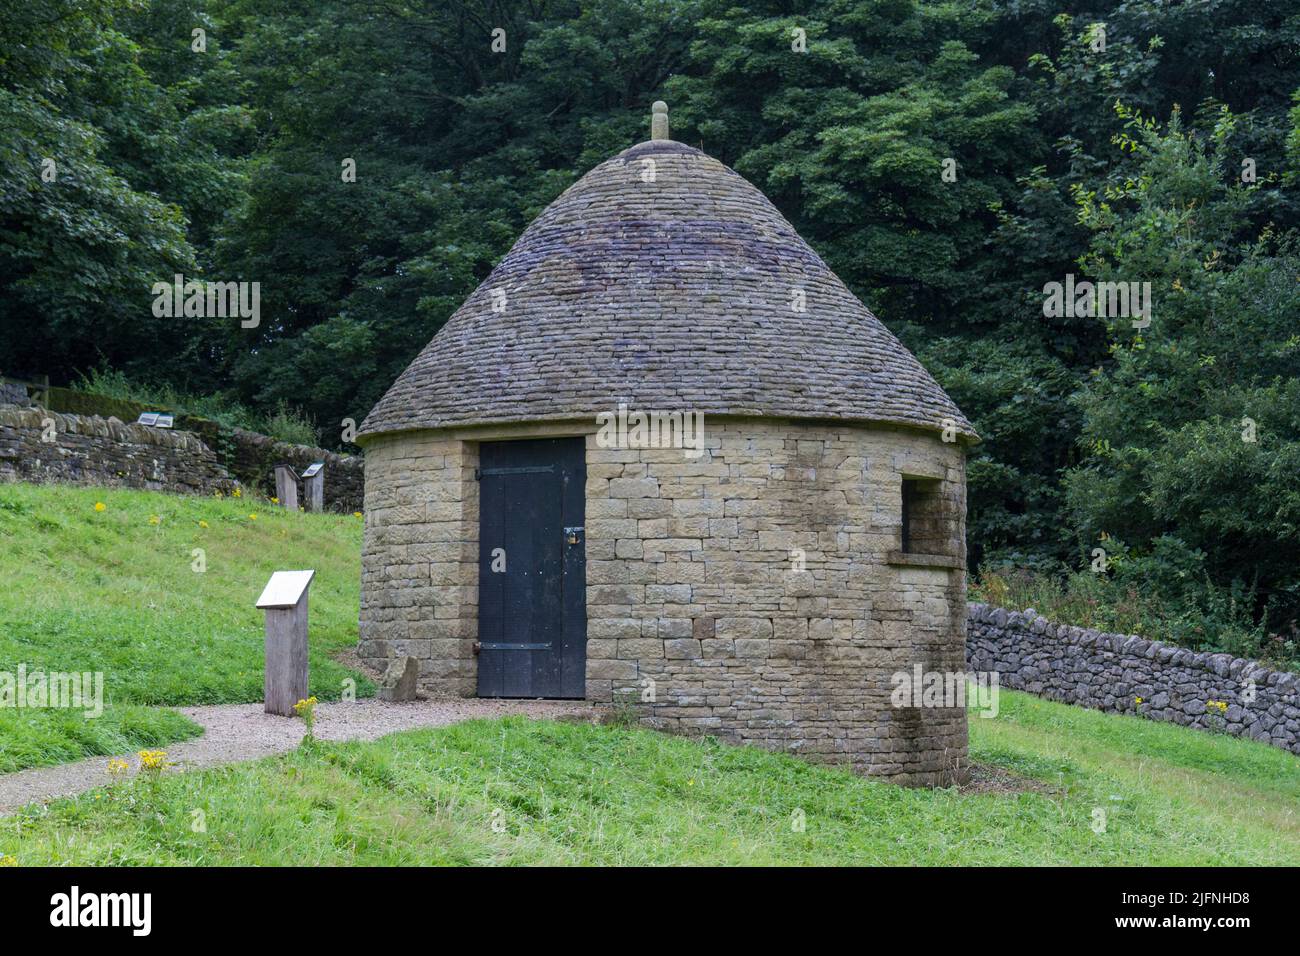 Example of a shepherds hut, part of a dry stone walling exhibit, Shibden Park, Halifax, Yorkshire, UK. Stock Photo